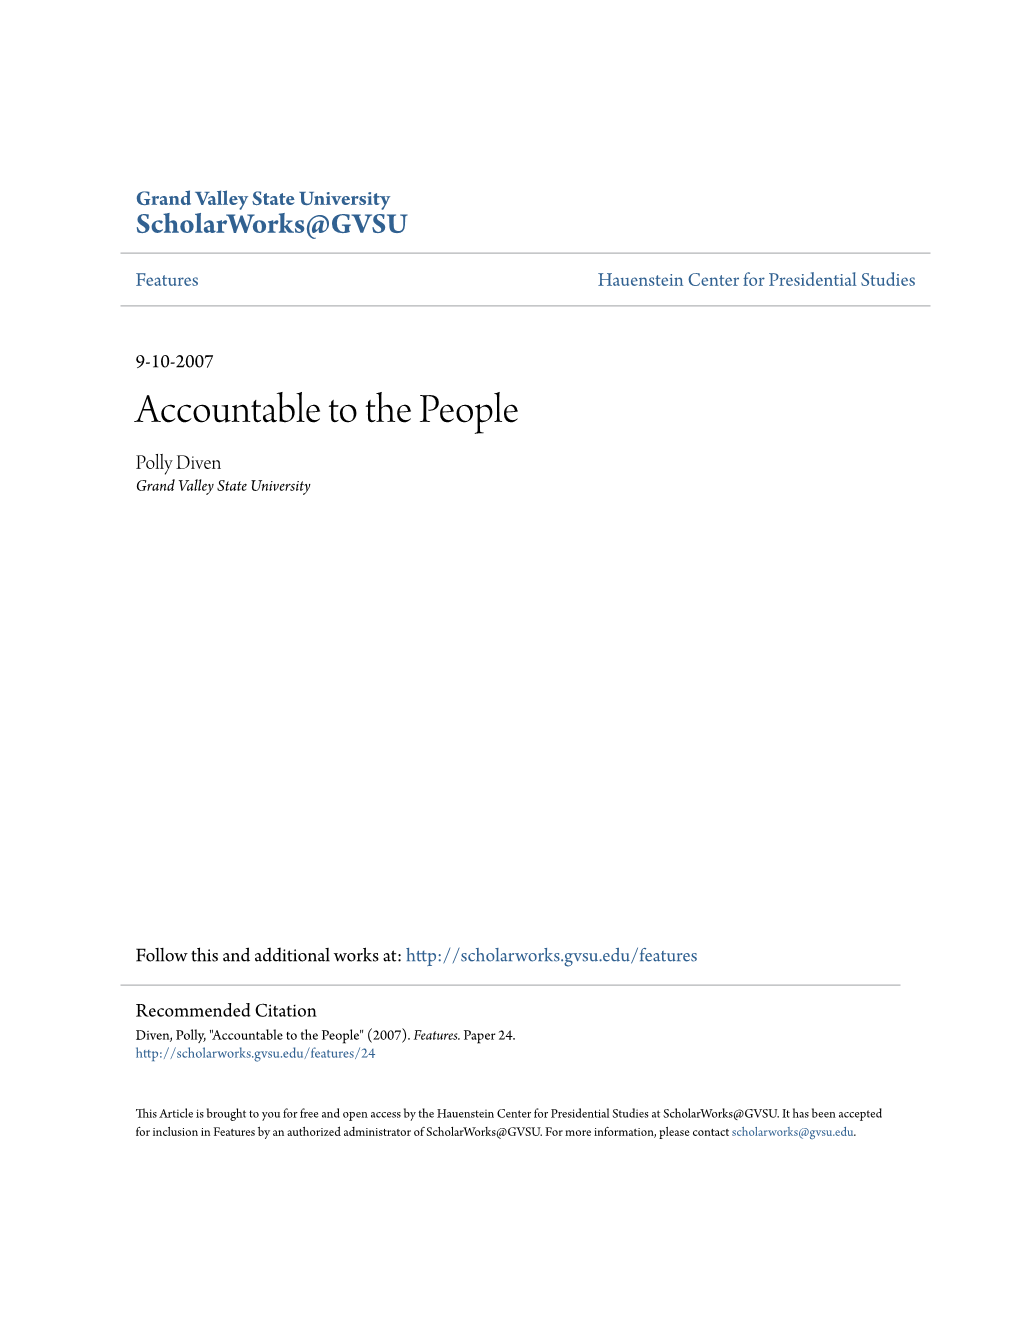 Accountable to the People Polly Diven Grand Valley State University